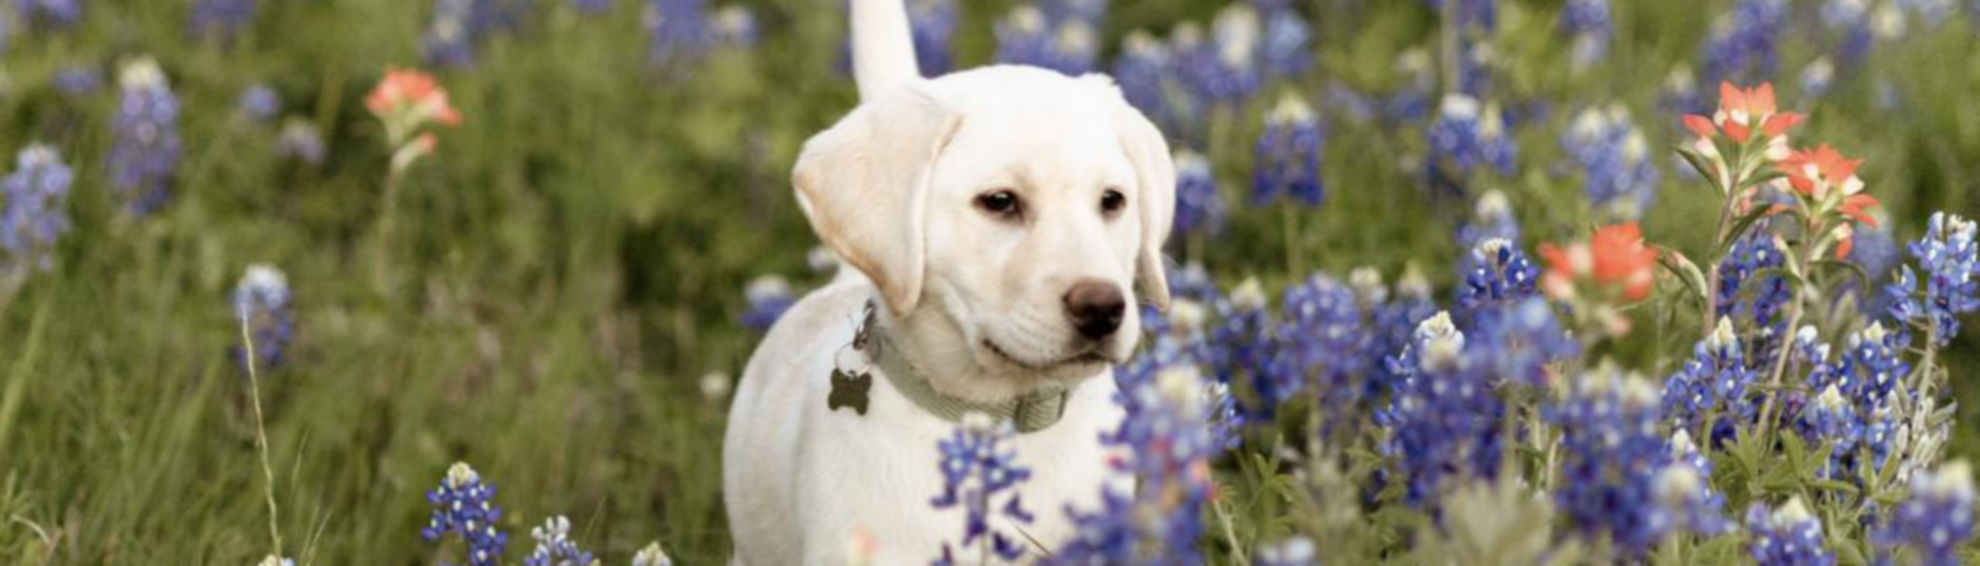 A yellow lab puppy standing in a green field full of purple flowers and green grass